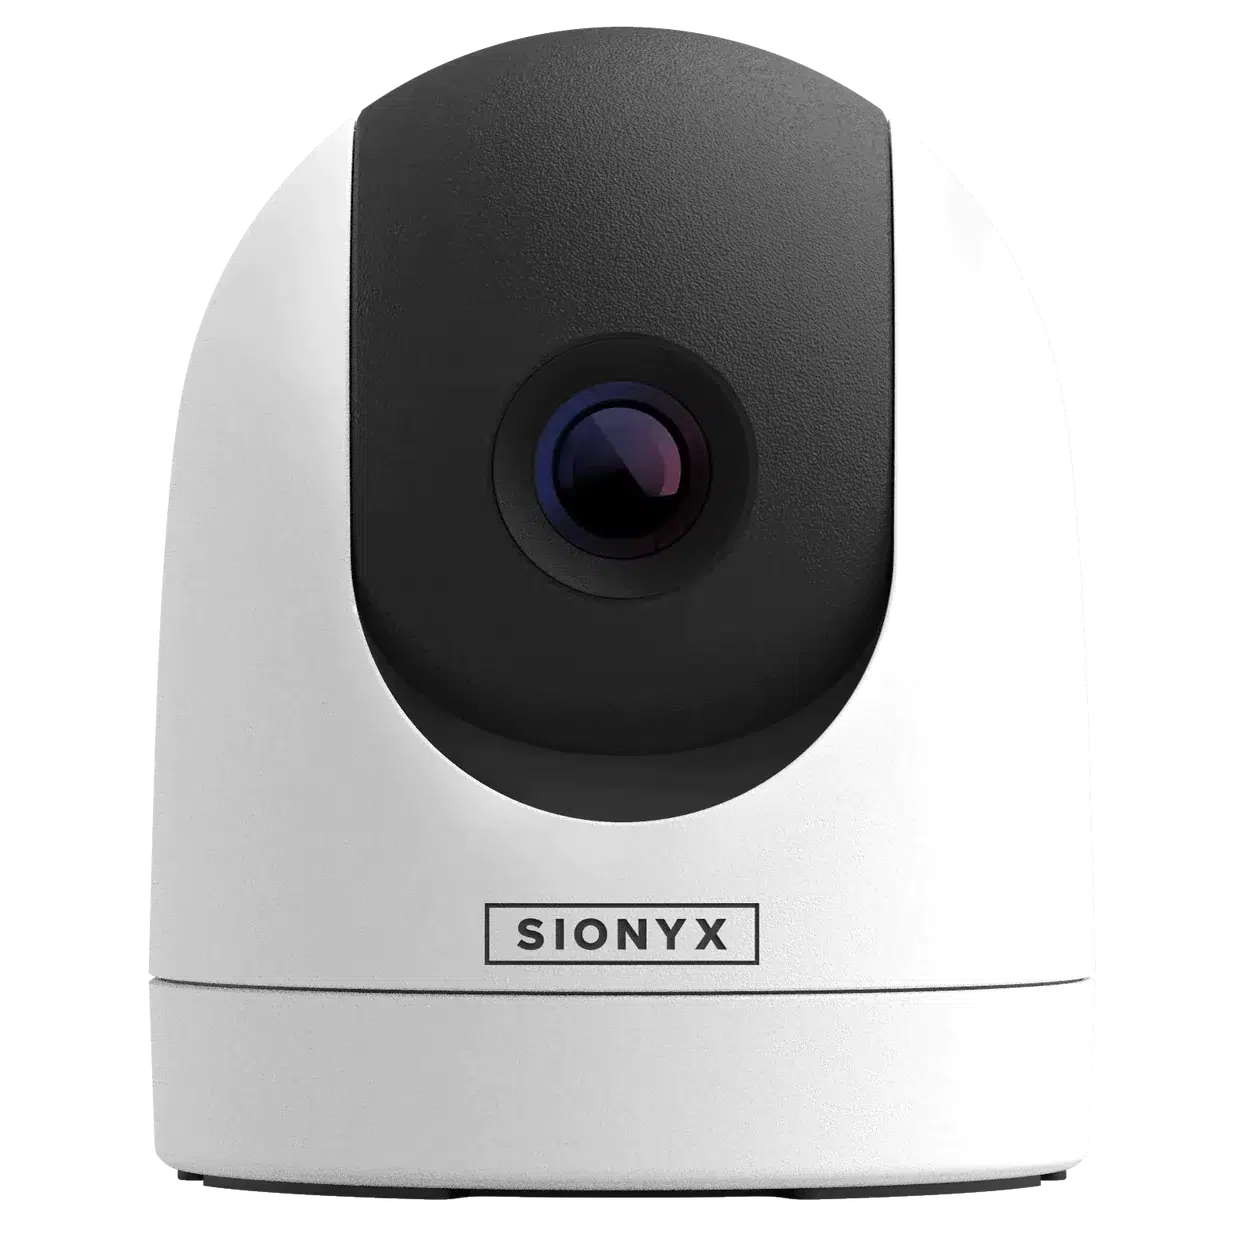 Sionyx Nightwave D1 Night Vision Camera-Accessories - Boating-Sionyx-White-Fishing Station